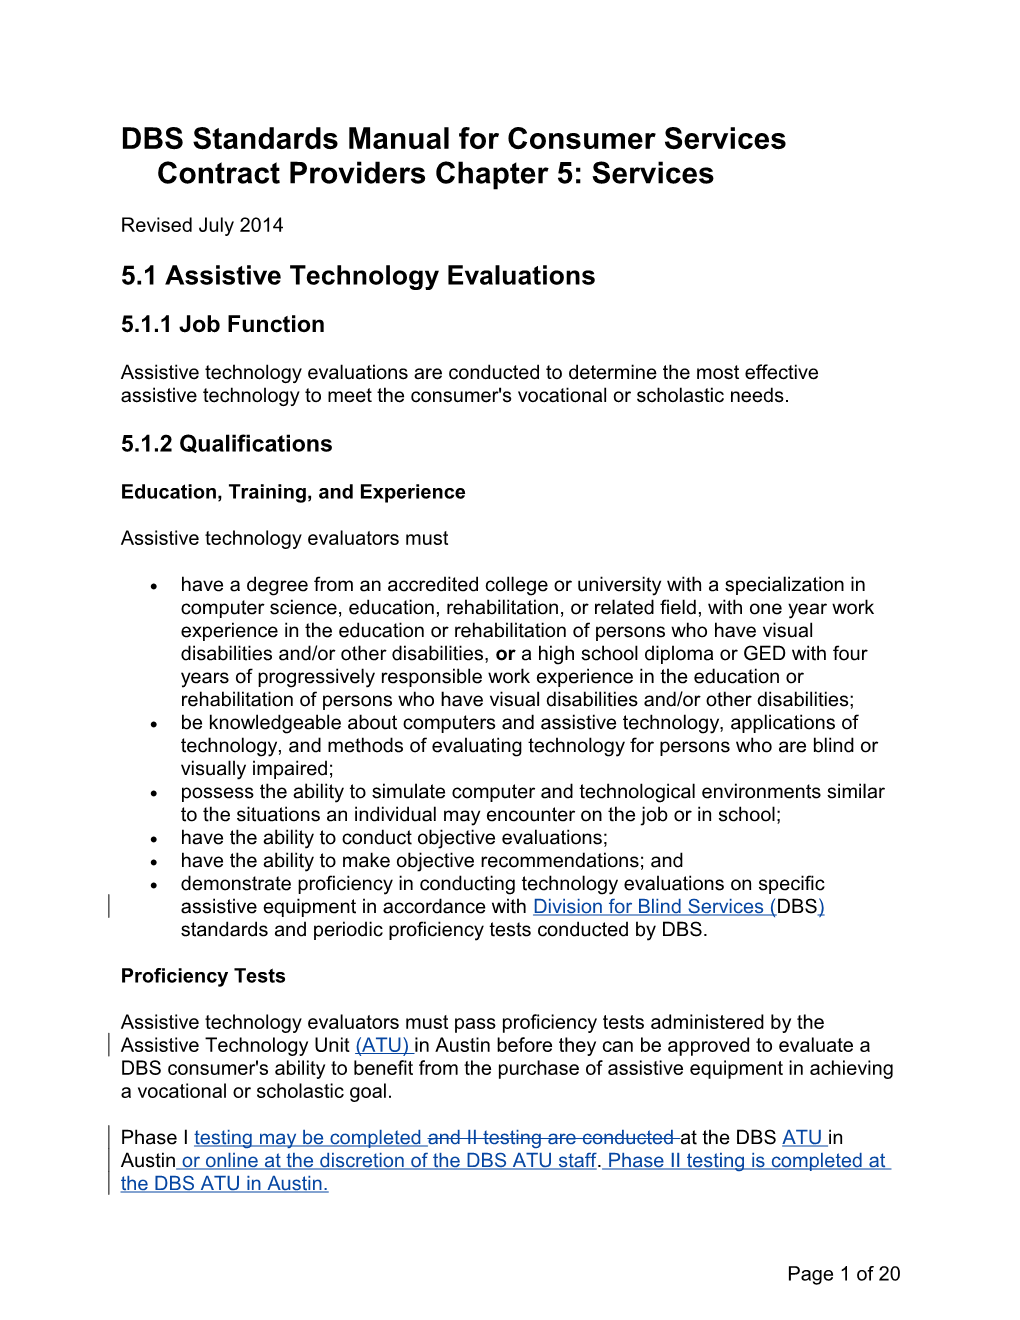 DBS Standards Manual for Consumer Services Contract Providers Chapter 5 Revisions, July 2014